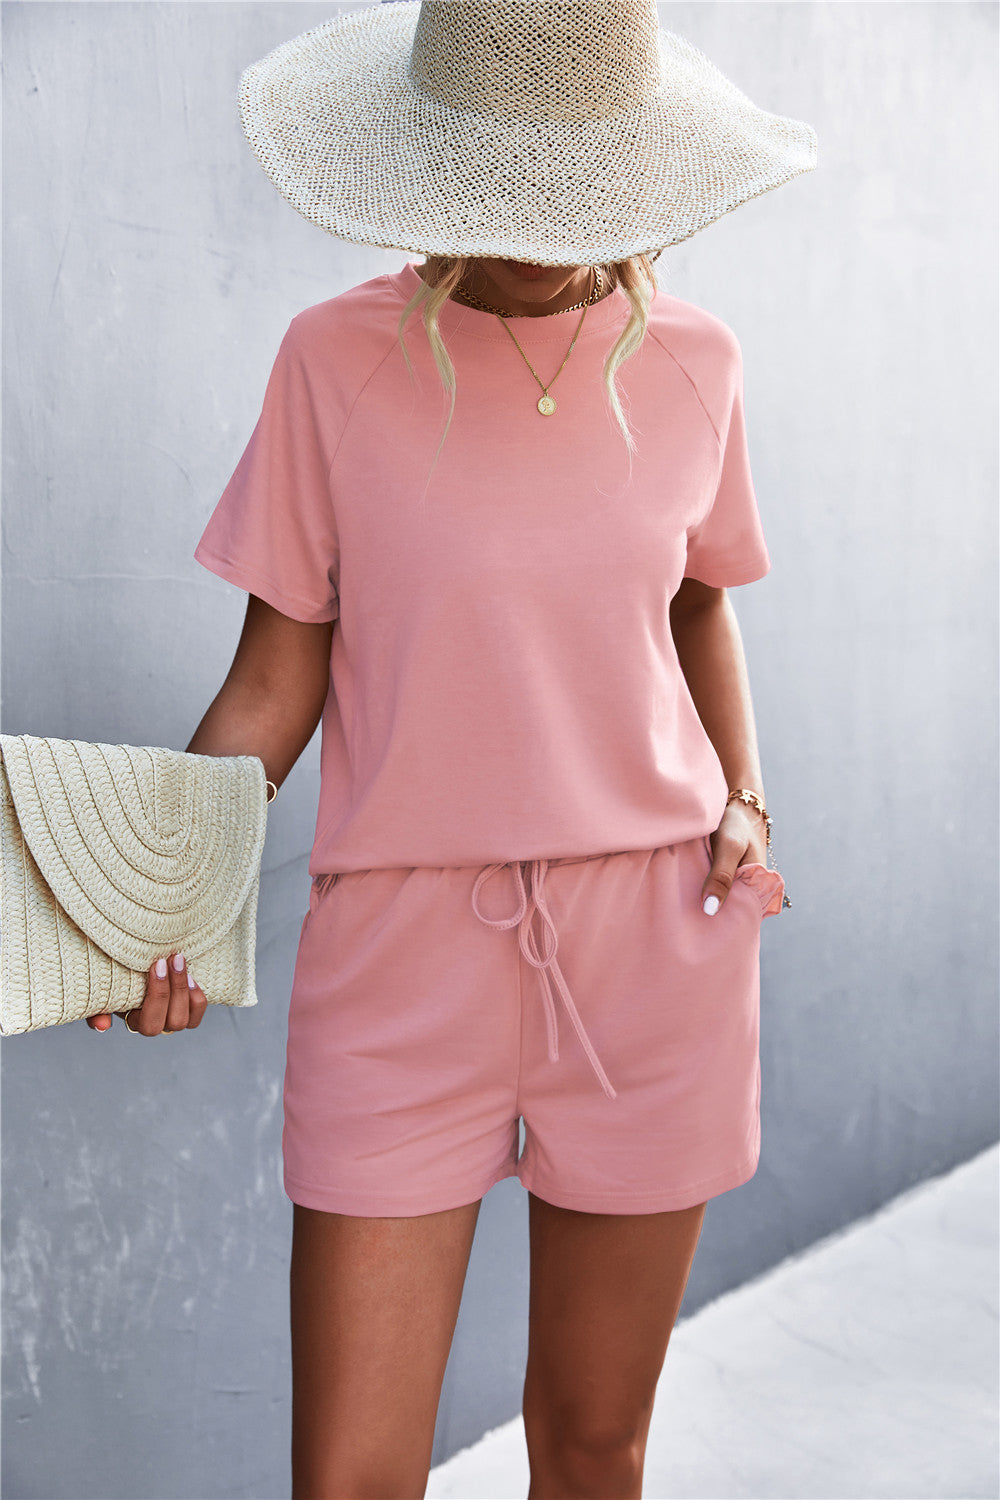 Raglan Sleeve Ruffle Hem Top and Shorts Set with Pockets- ONLINE ONLY 2-10 day Shipping